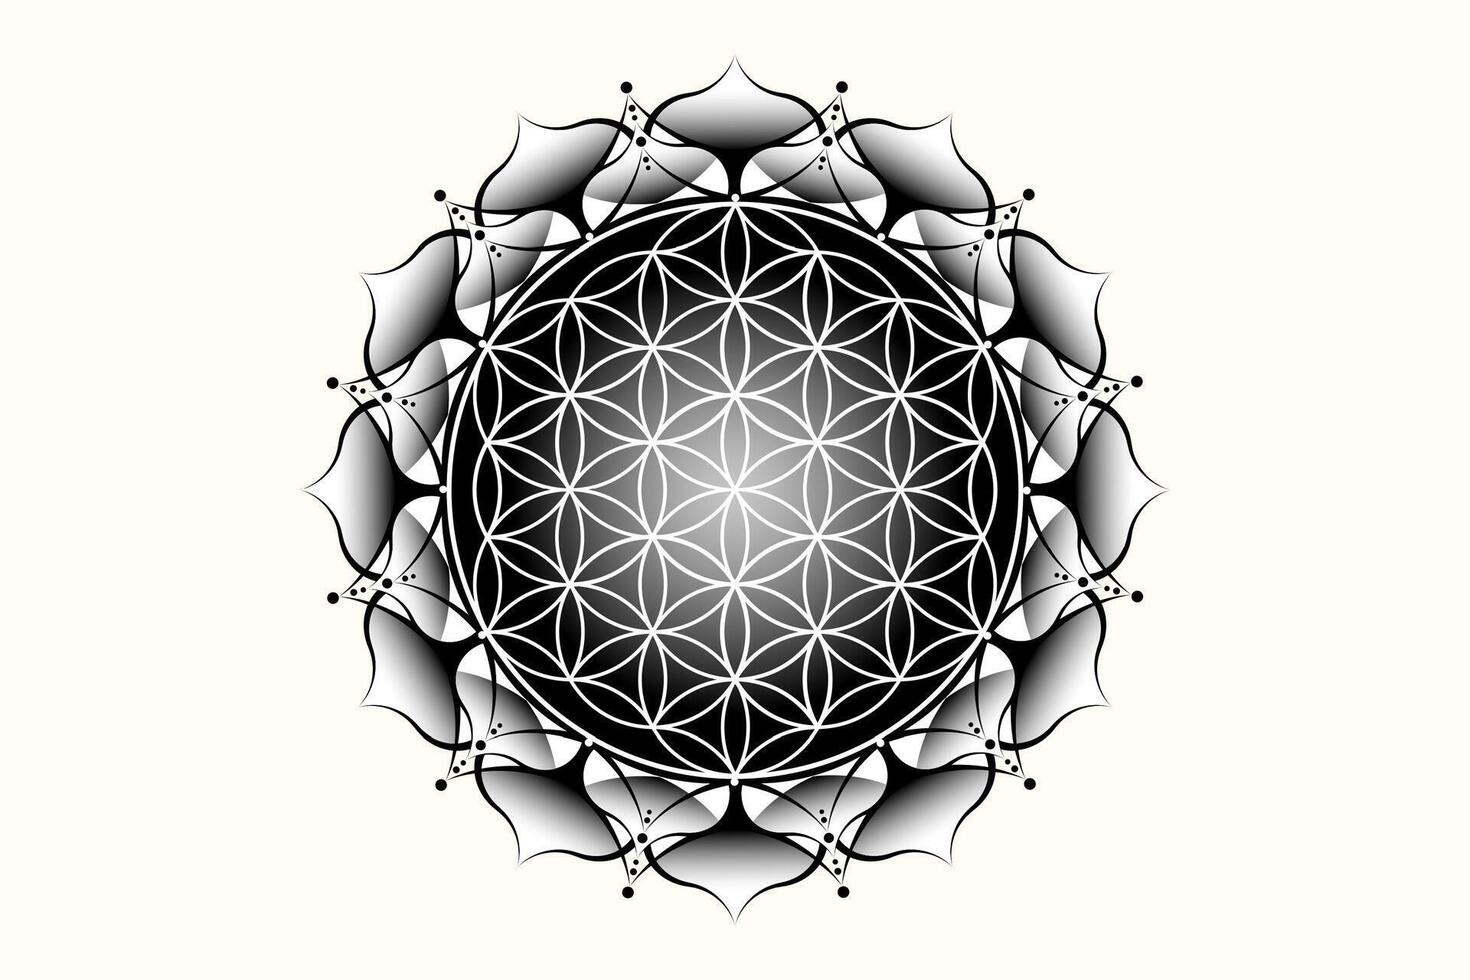 Sacred lotus yantra mandala, Mystical Flower of Life. Sacred geometry, vector logo graphic element isolated. Mystic icon seed of life, geometric drawing sign, esoteric lotus flower on white background